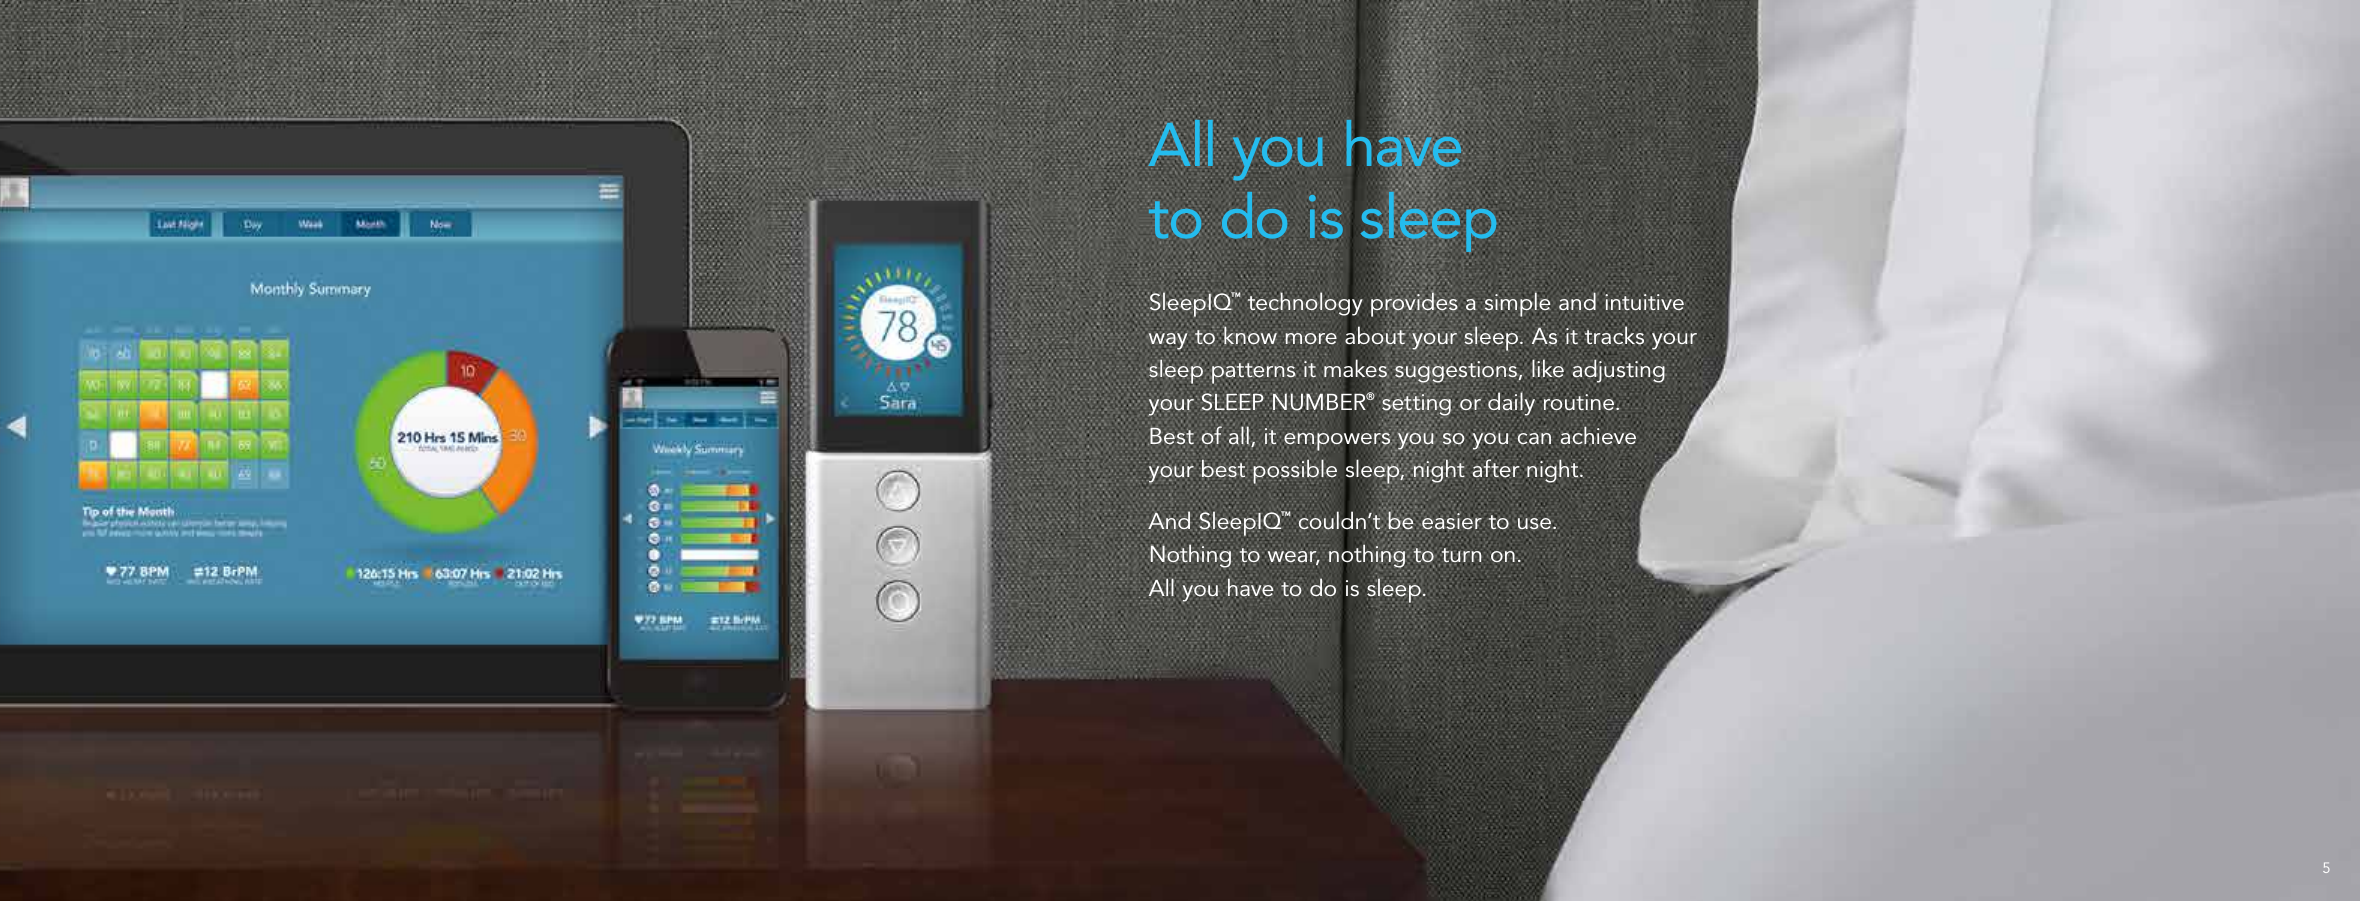 All you have  to do is sleepSleepIQ™ technology provides a simple and intuitive  way to know more about your sleep. As it tracks your sleep patterns it makes suggestions, like adjusting your SLEEP NUMBER® setting or daily routine.  Best of all, it empowers you so you can achieve  your best possible sleep, night after night.And SleepIQ™ couldn’t be easier to use.  Nothing to wear, nothing to turn on.  All you have to do is sleep.5